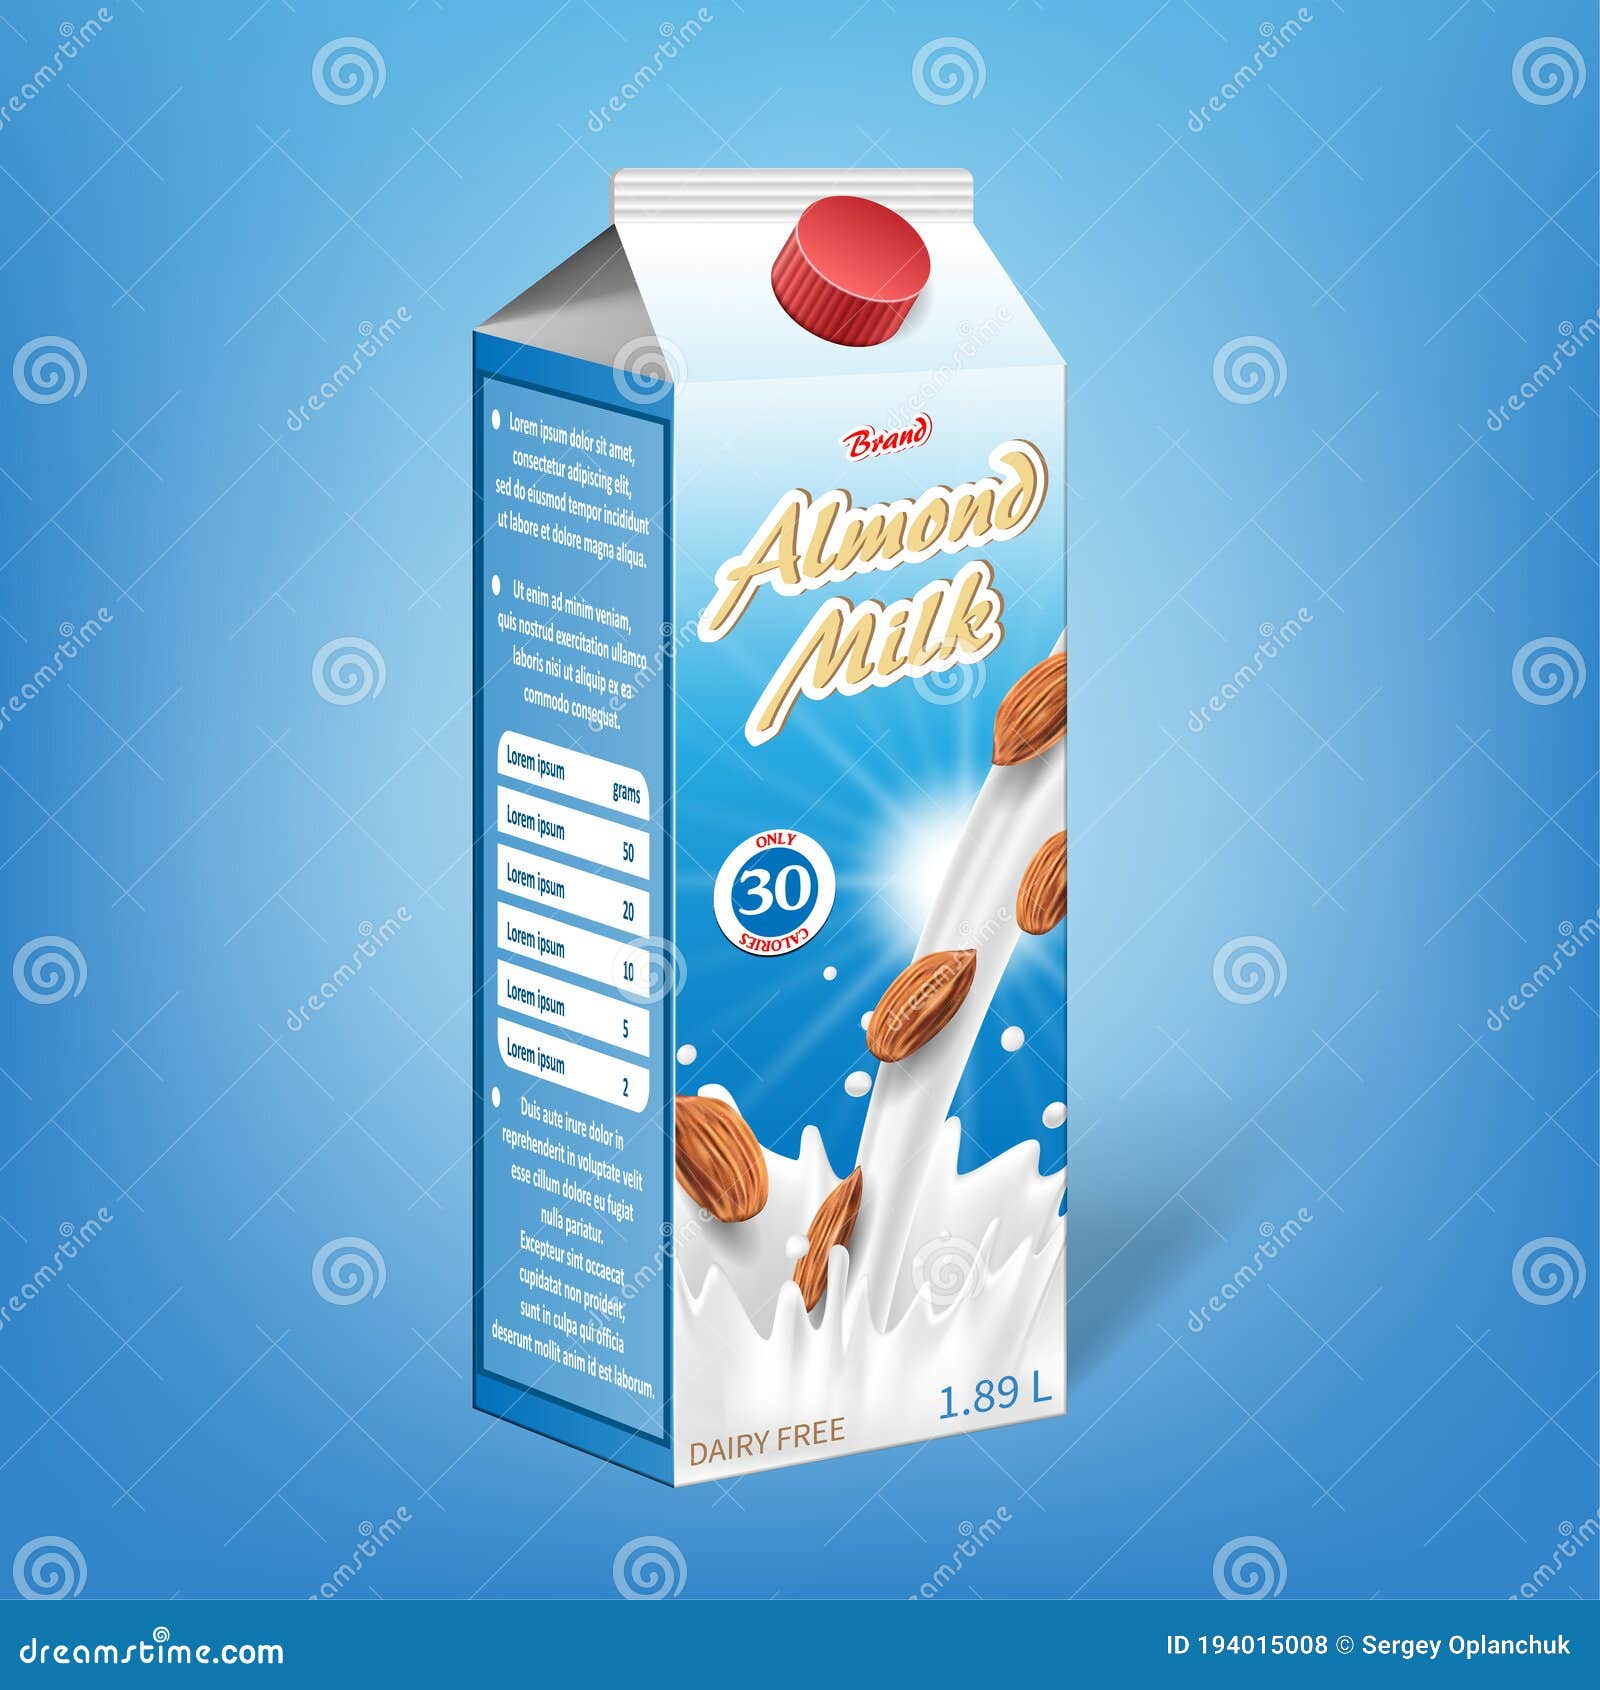 realistic almond milk carton package. milk package   template for vegan natural meal. dairy product for